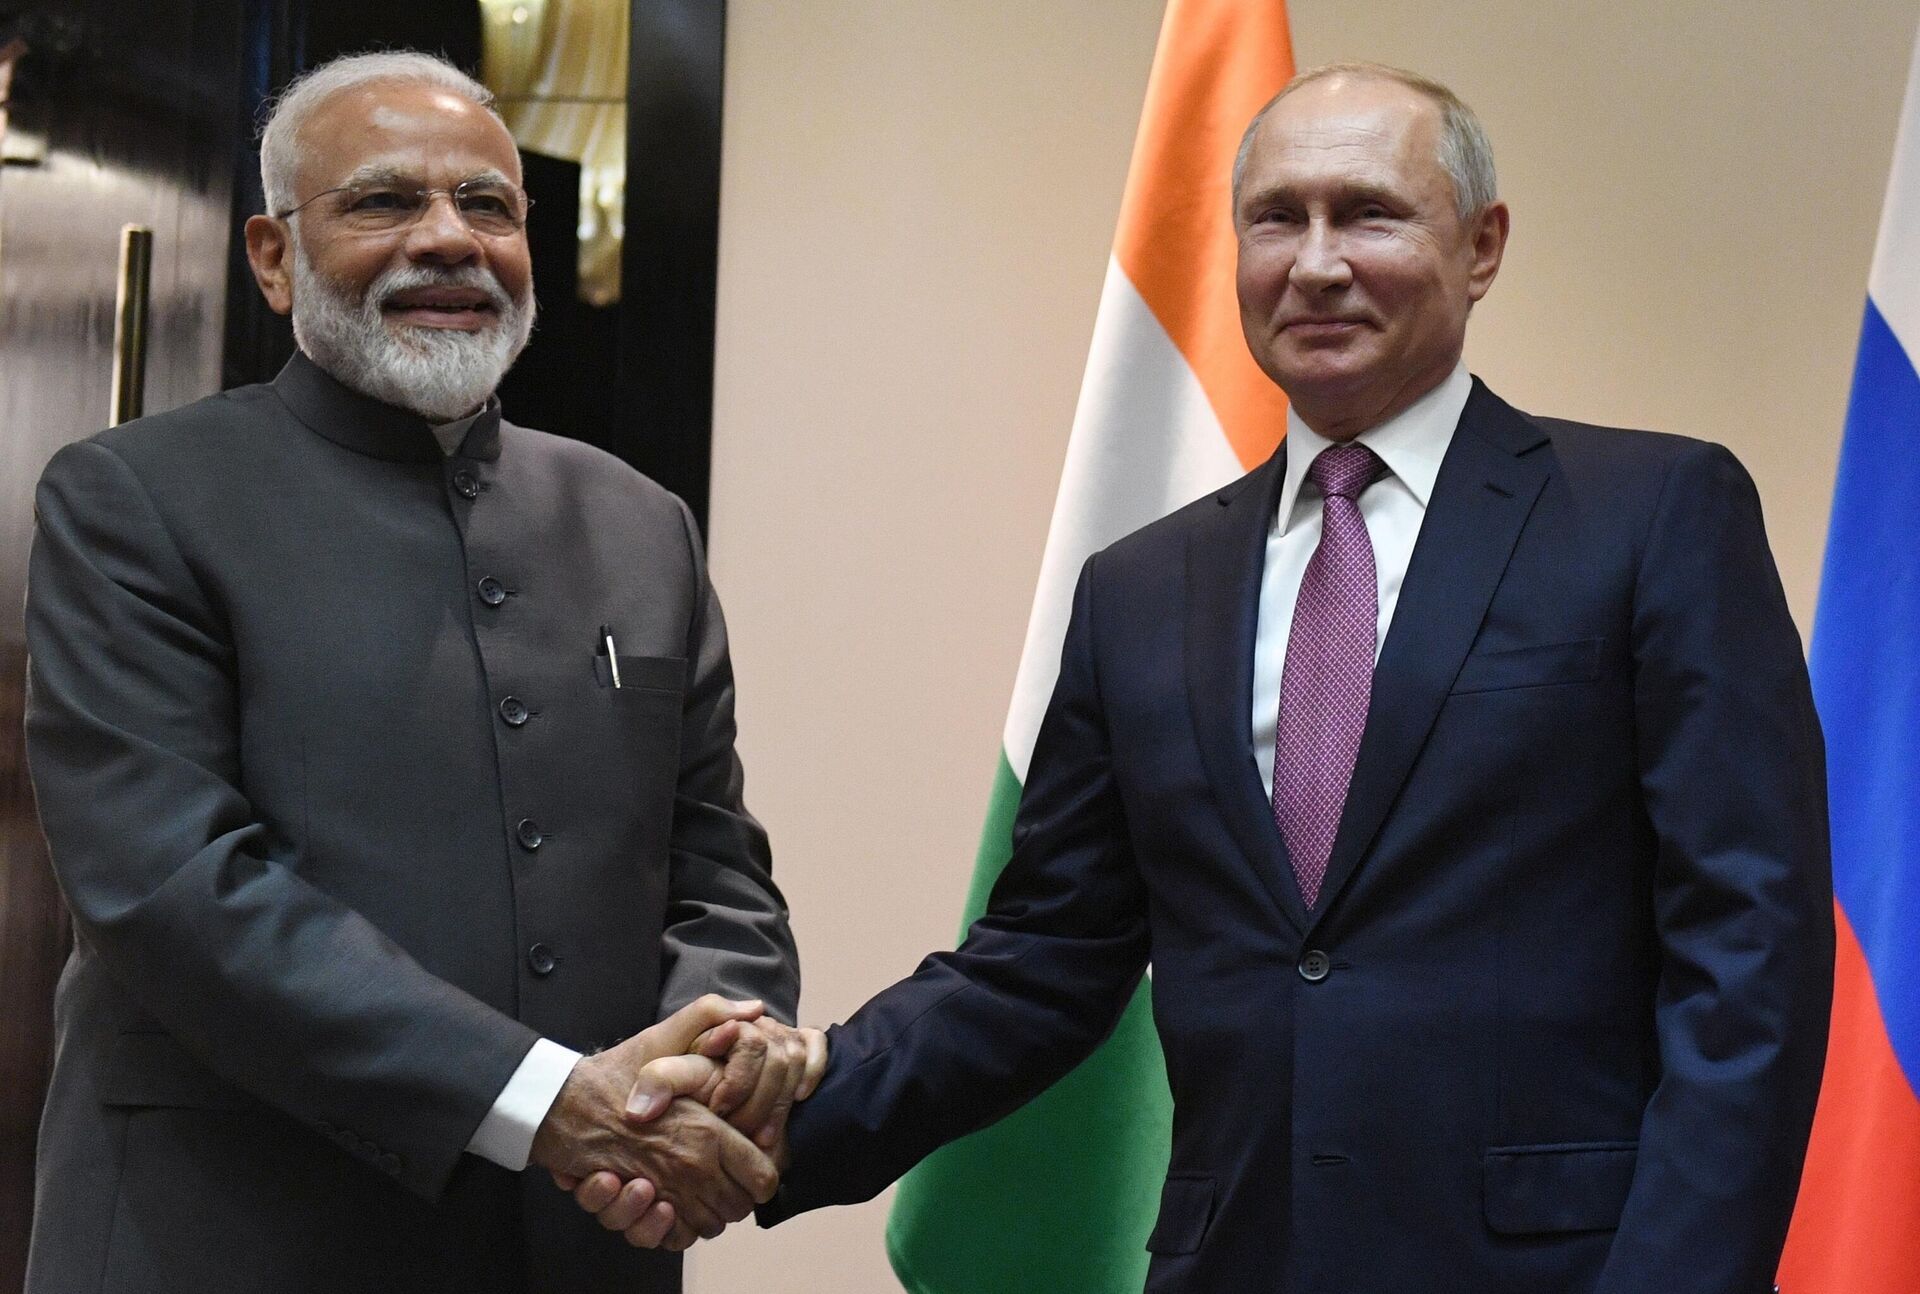 Russian President Vladimir Putin, right, and Indian Prime Minister Narendra Modi pose for a photo prior to their talks on a sideline of the Shanghai Cooperation Organization summit in Bishkek, Kyrgyzstan, June 13, 2019 - Sputnik India, 1920, 10.05.2024